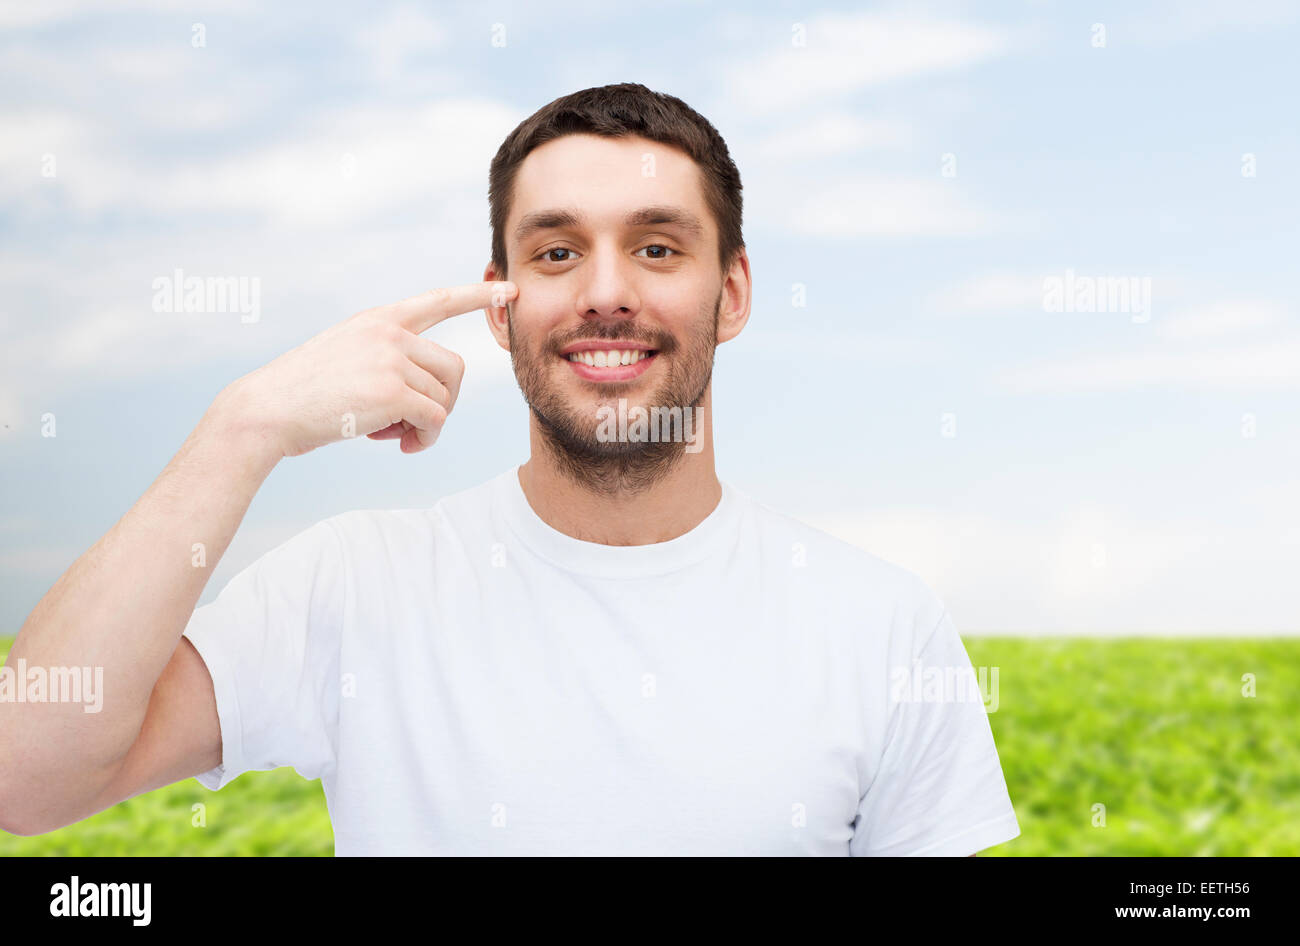 smiling young handsome man pointing to eyes Stock Photo